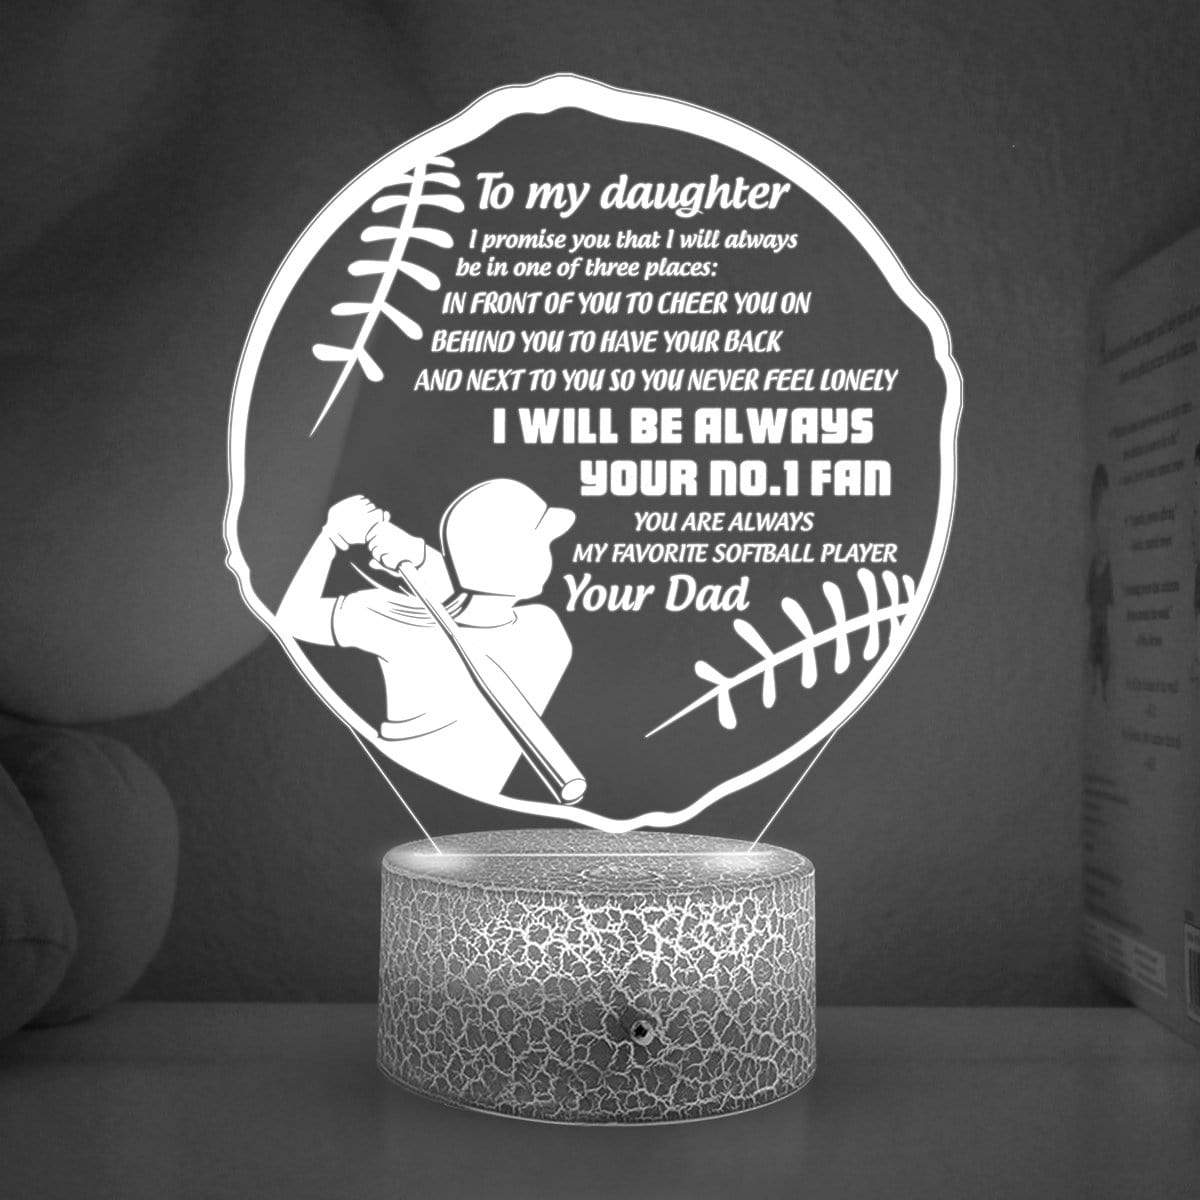 3D Led Light - Softball - From Dad - To My Daughter - In Front Of You To Cheer You On - Glca17001